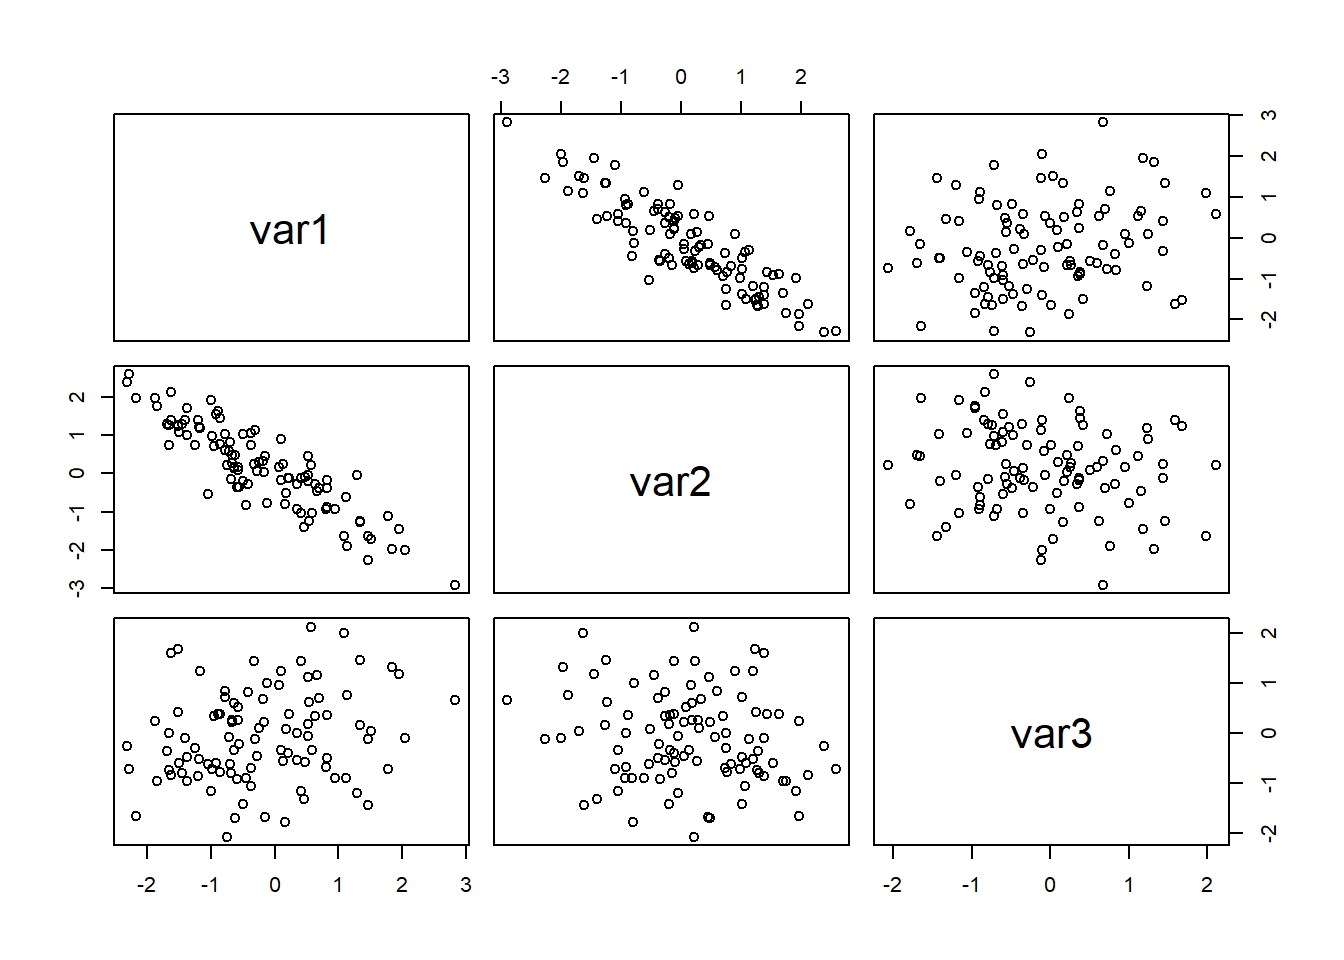 A scatterplot matrix for three variables (100 observations)